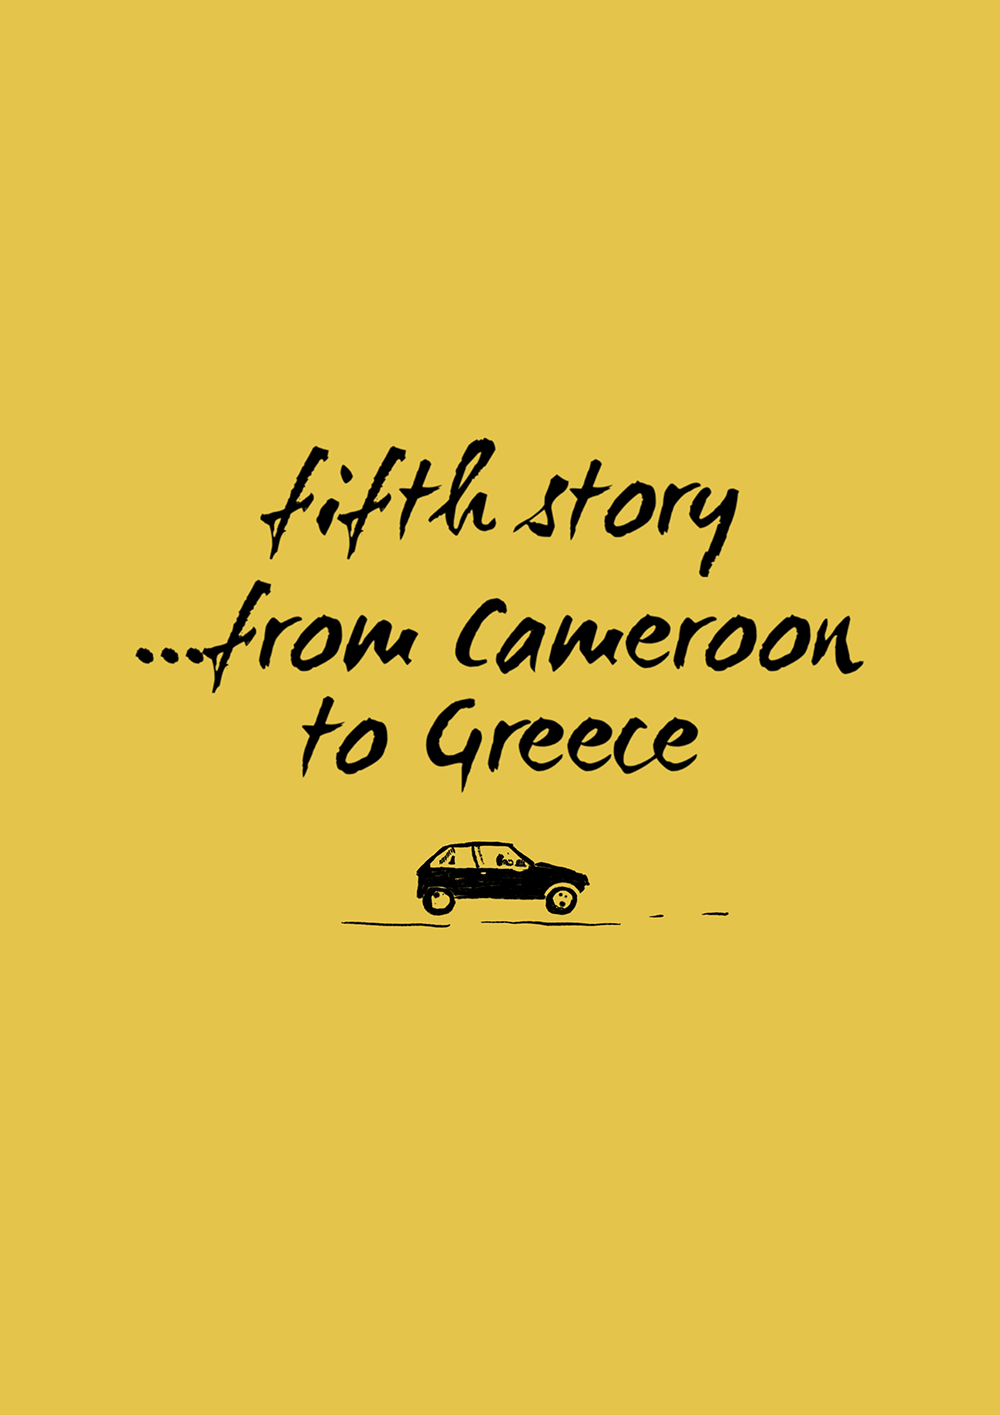 Counter stories: Fifth story ... from Cameroon to Greece page 001